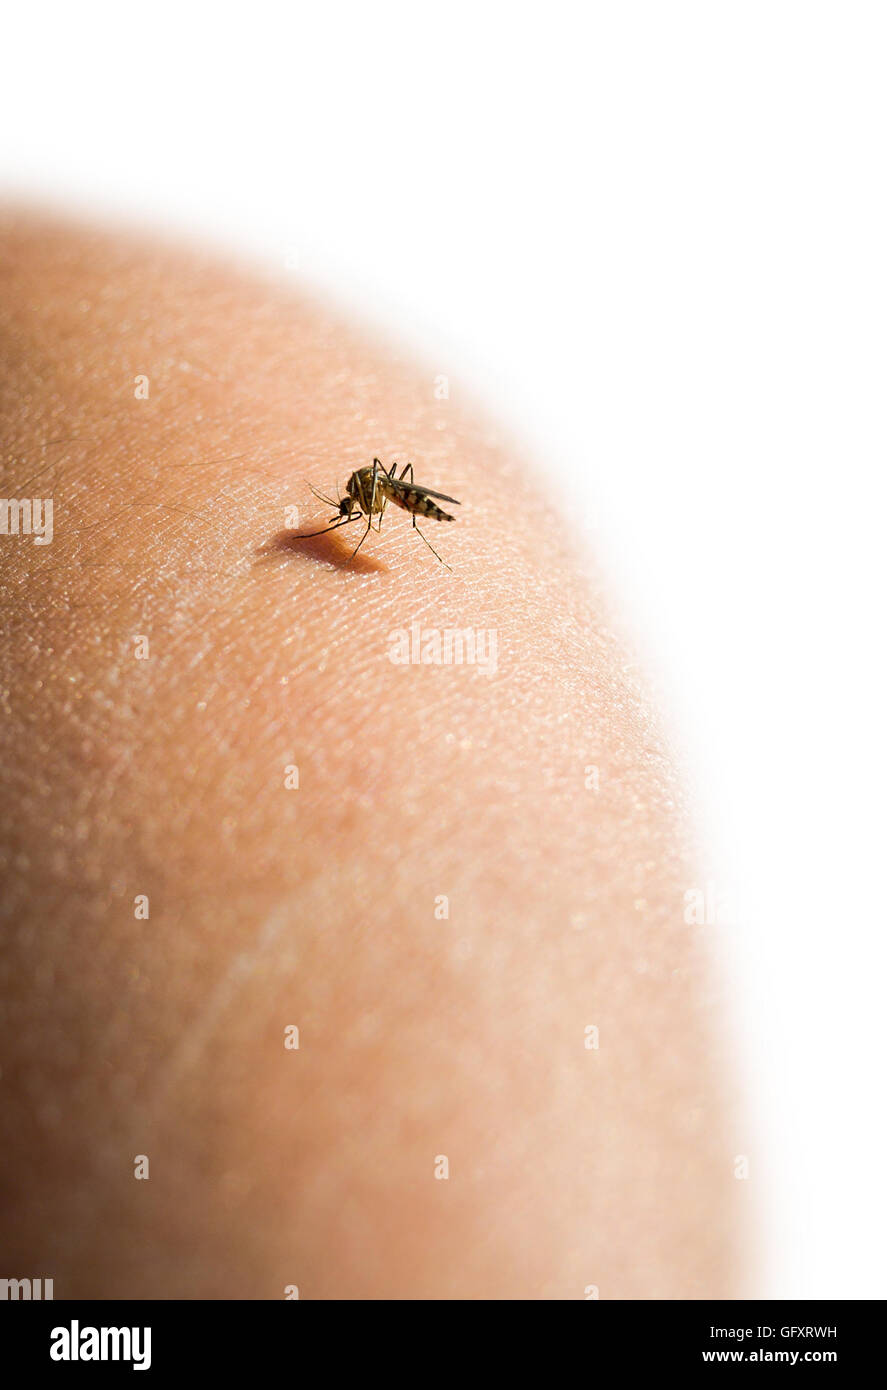 Mosquito on human shoulder Stock Photo